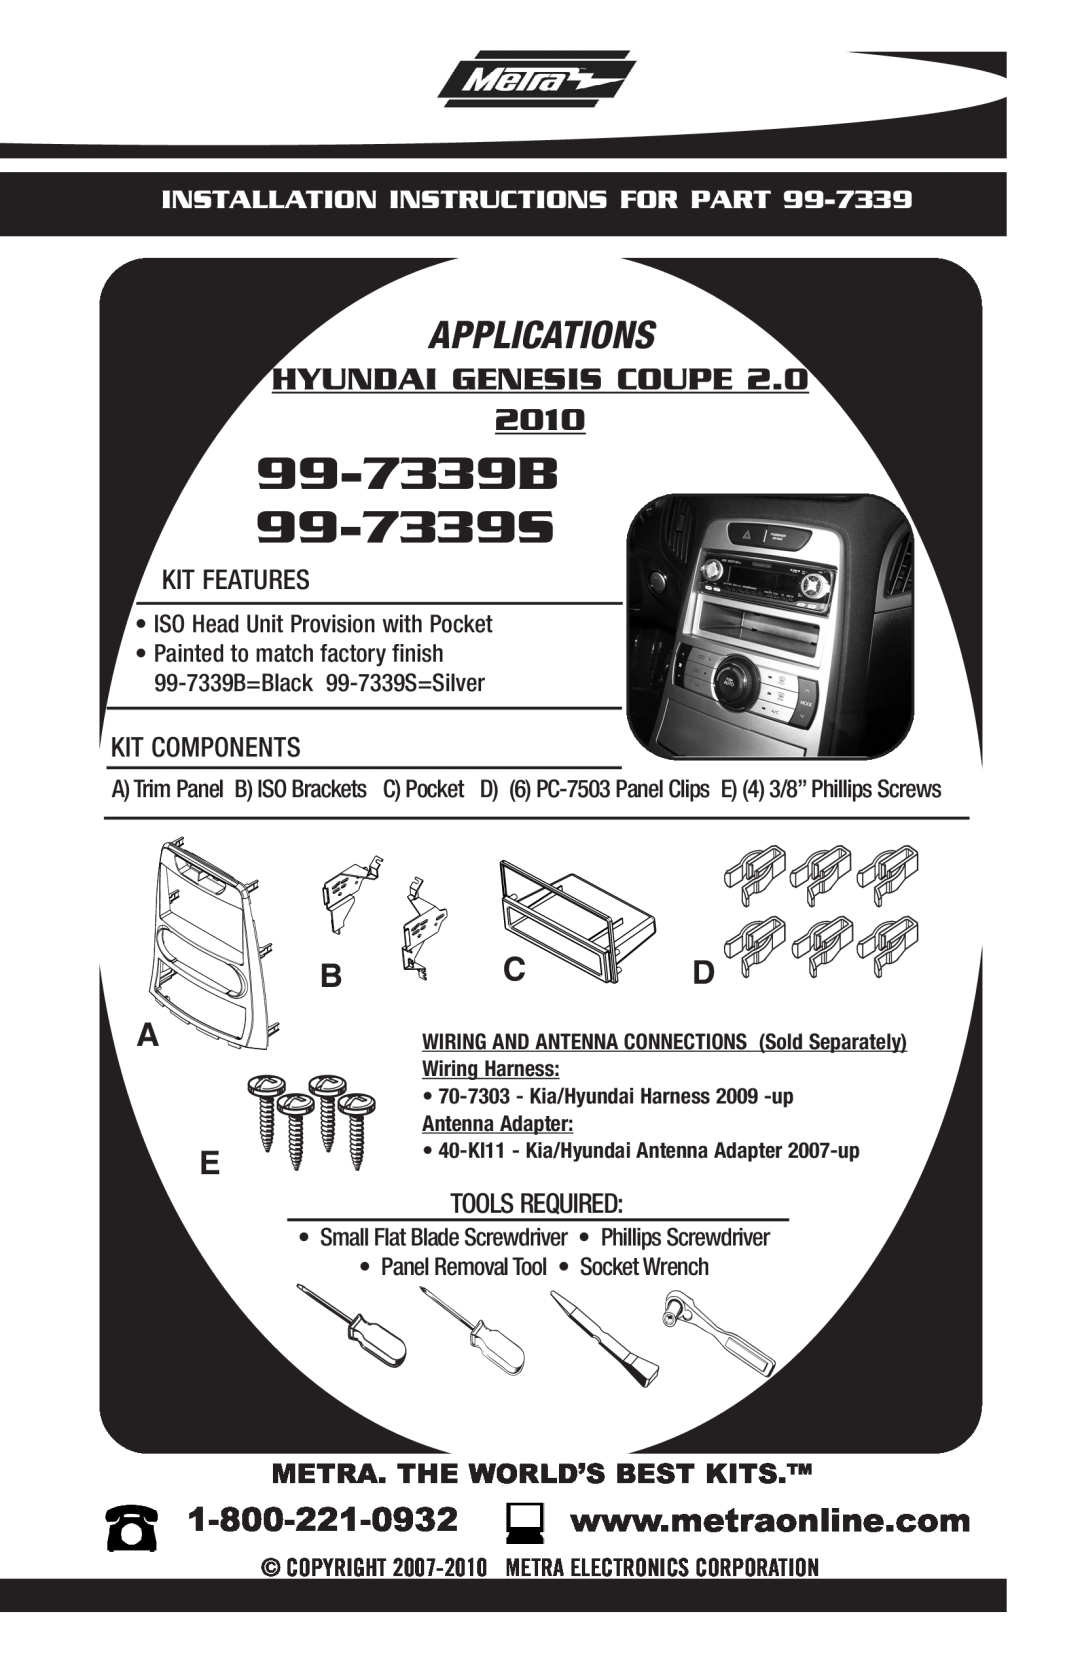 Metra Electronics 99-7339S installation instructions Kit Features, Kit Components, Tools Required, Wiring Harness 